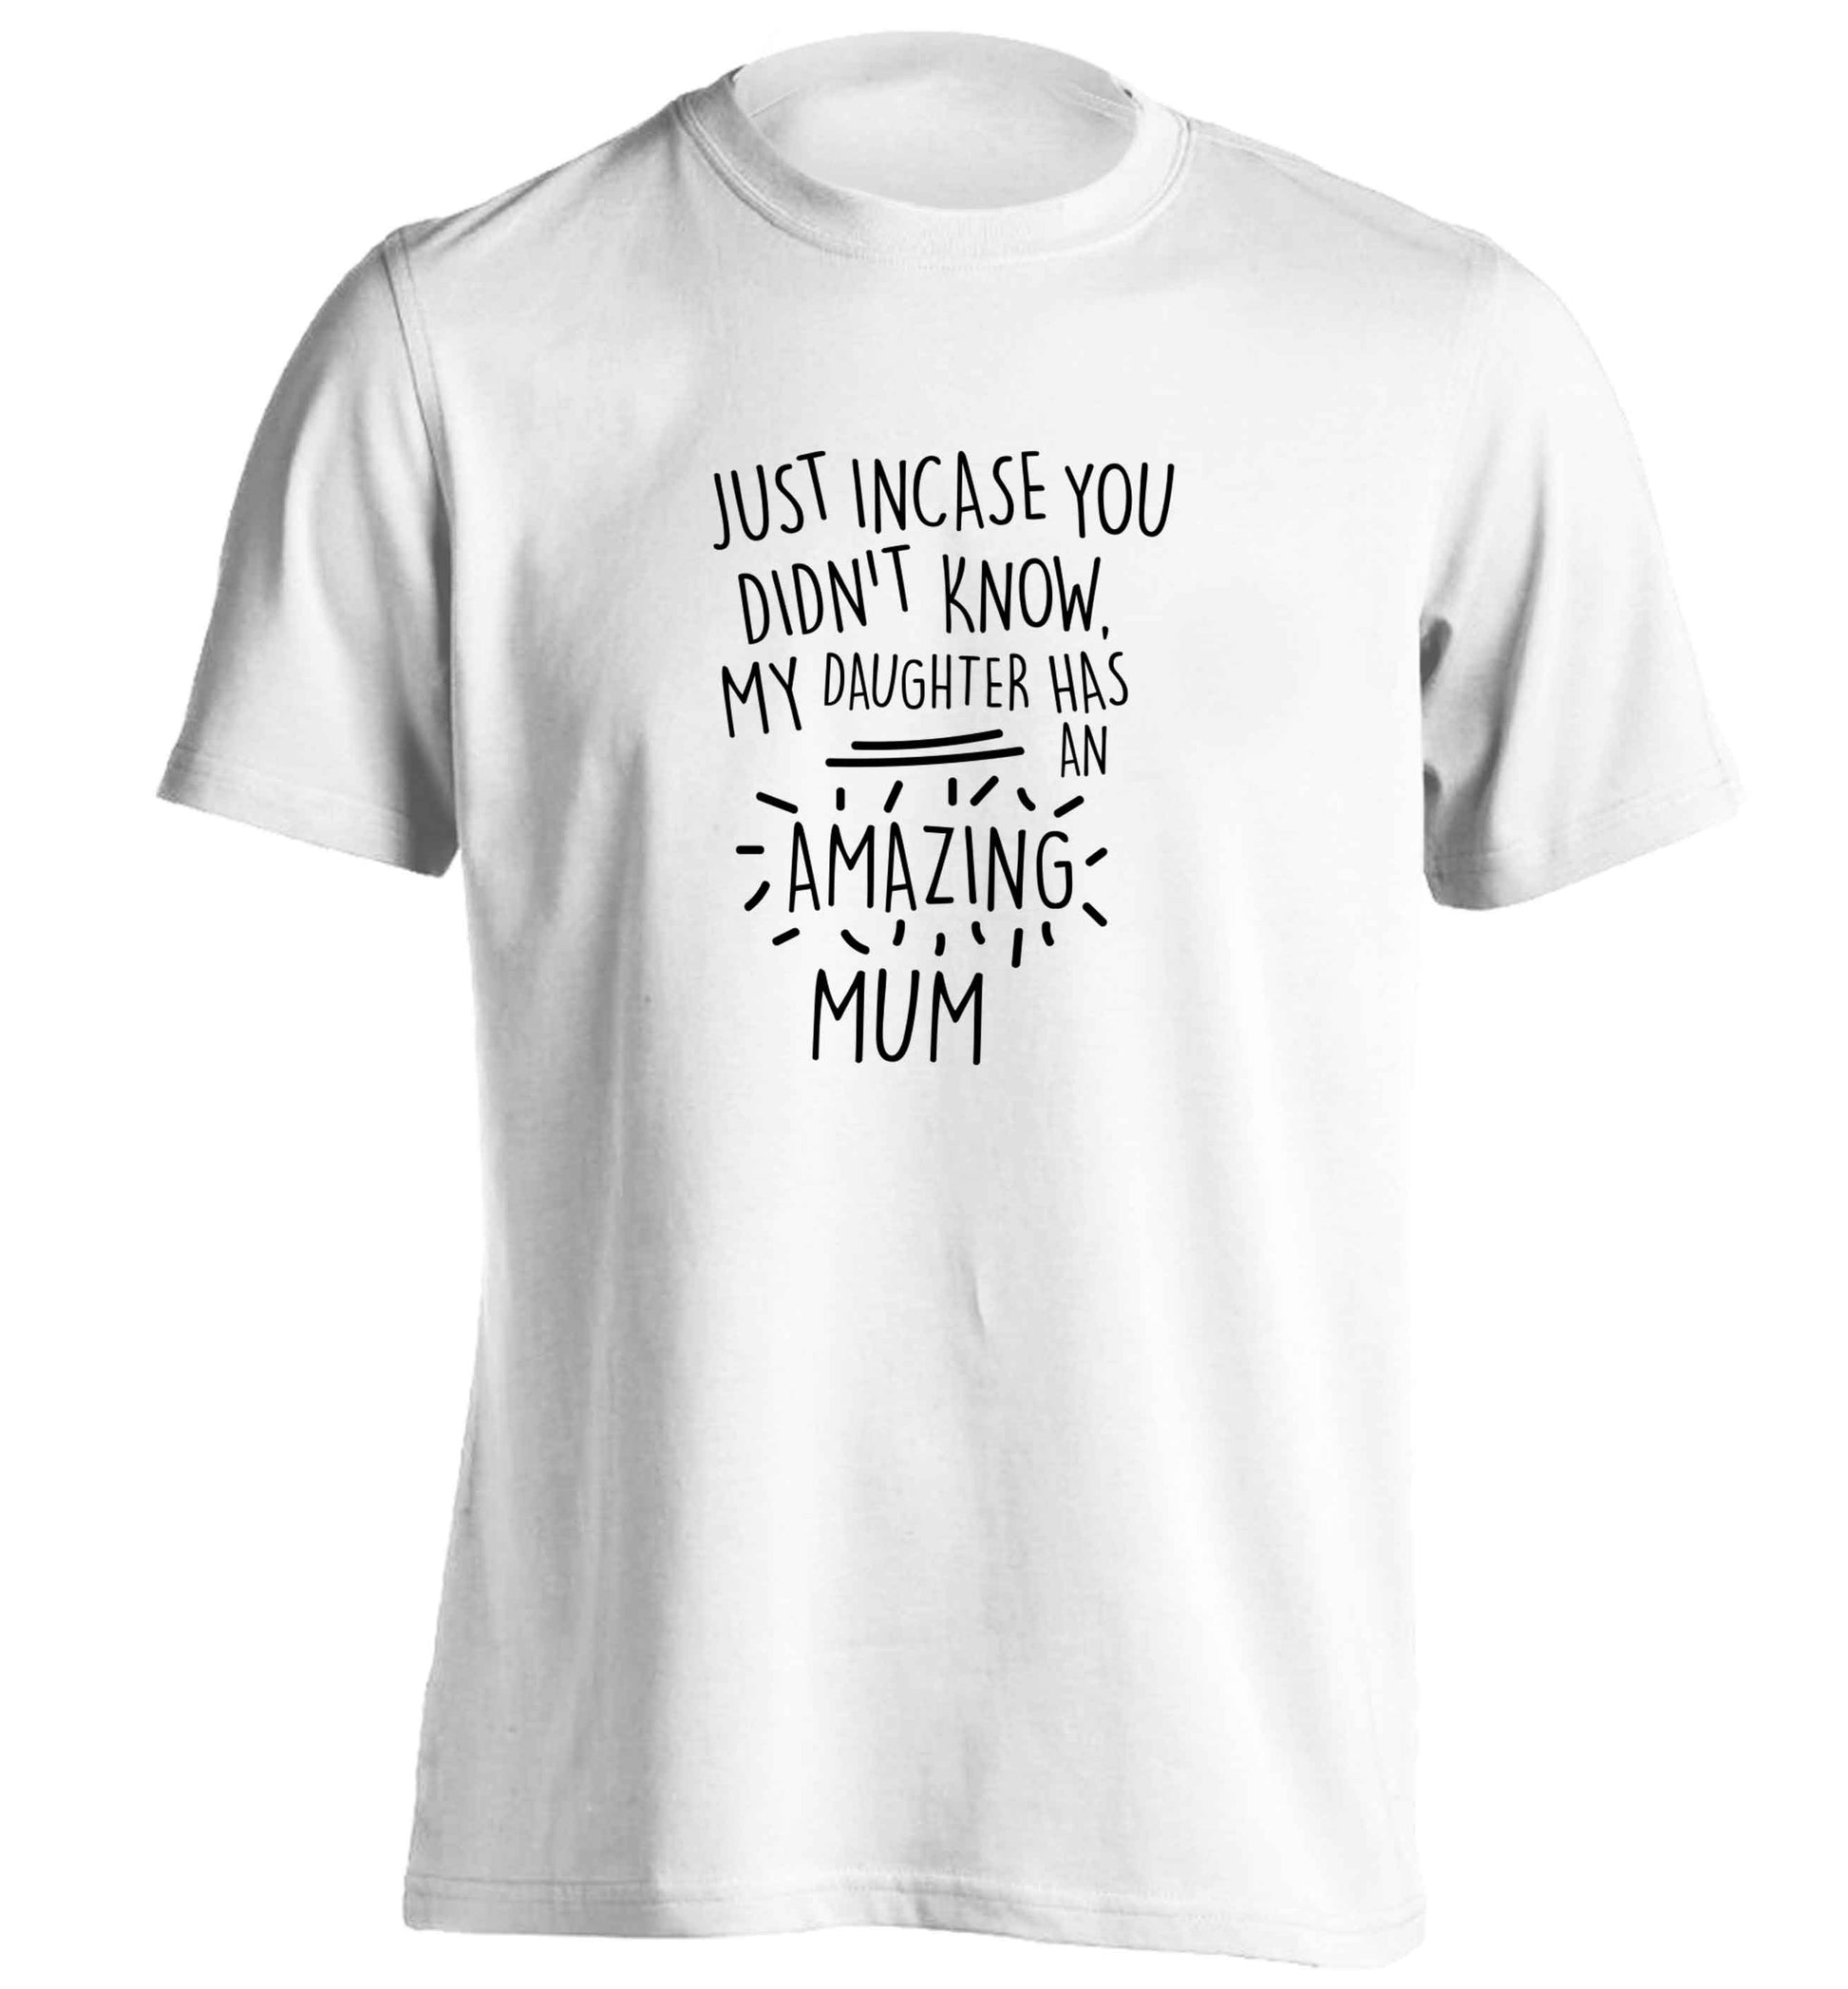 Just incase you didn't know my daughter has an amazing mum adults unisex white Tshirt 2XL